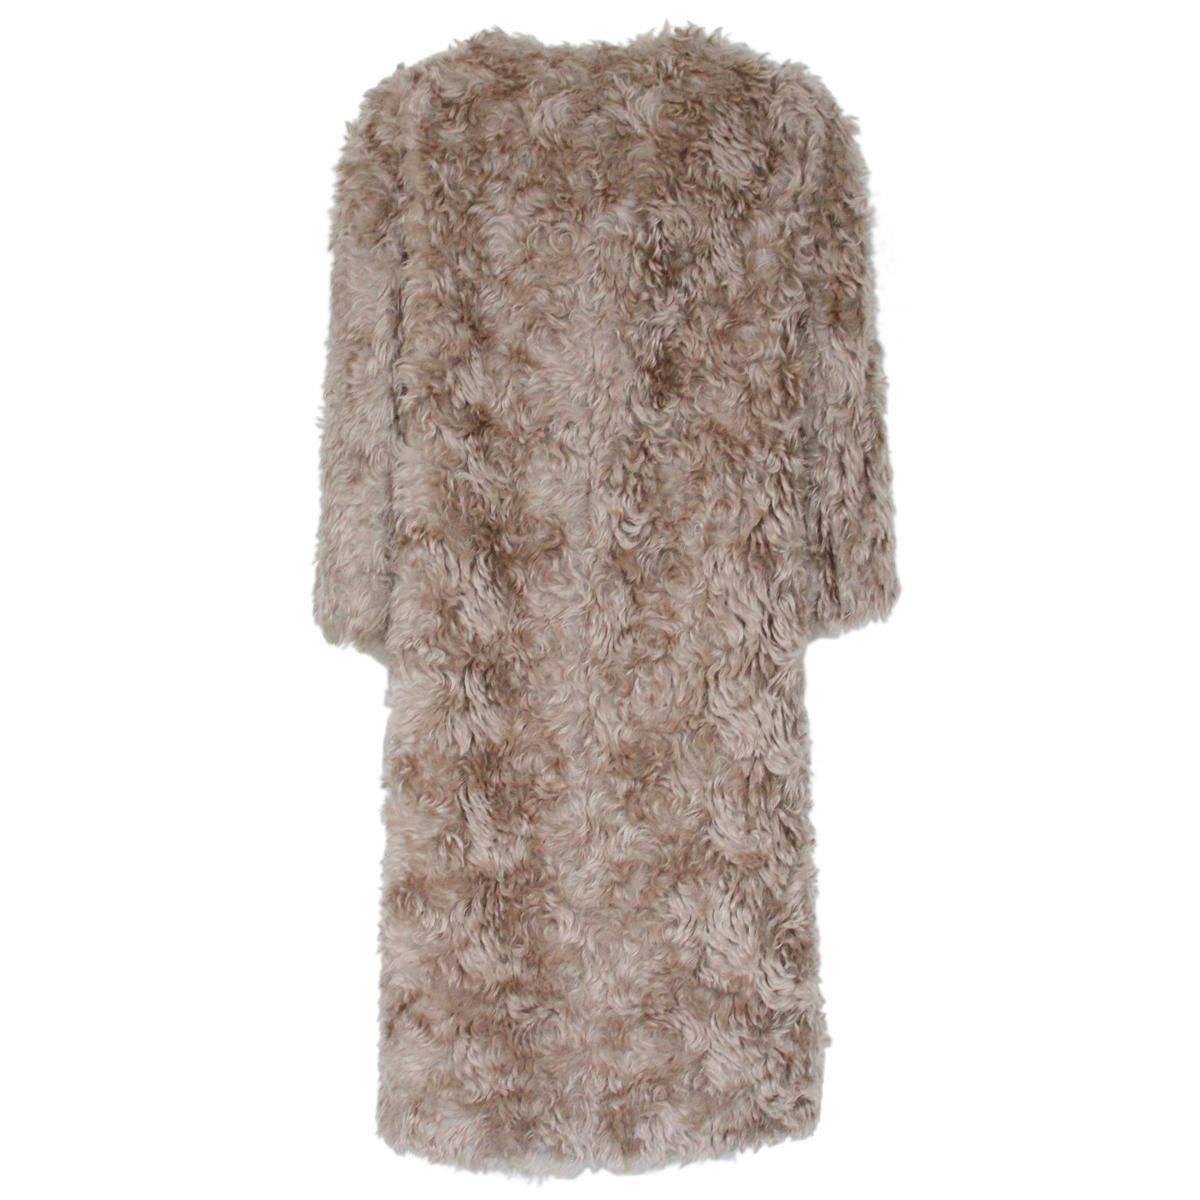 Beautiful and chic Prada coat
Mohair wool
Champagne color
3/4 Sleeve
3 Authomatic buttons
2 Pockets
Total length cm 95 (37.4 inches)
Worldwide express shipping included in the price !